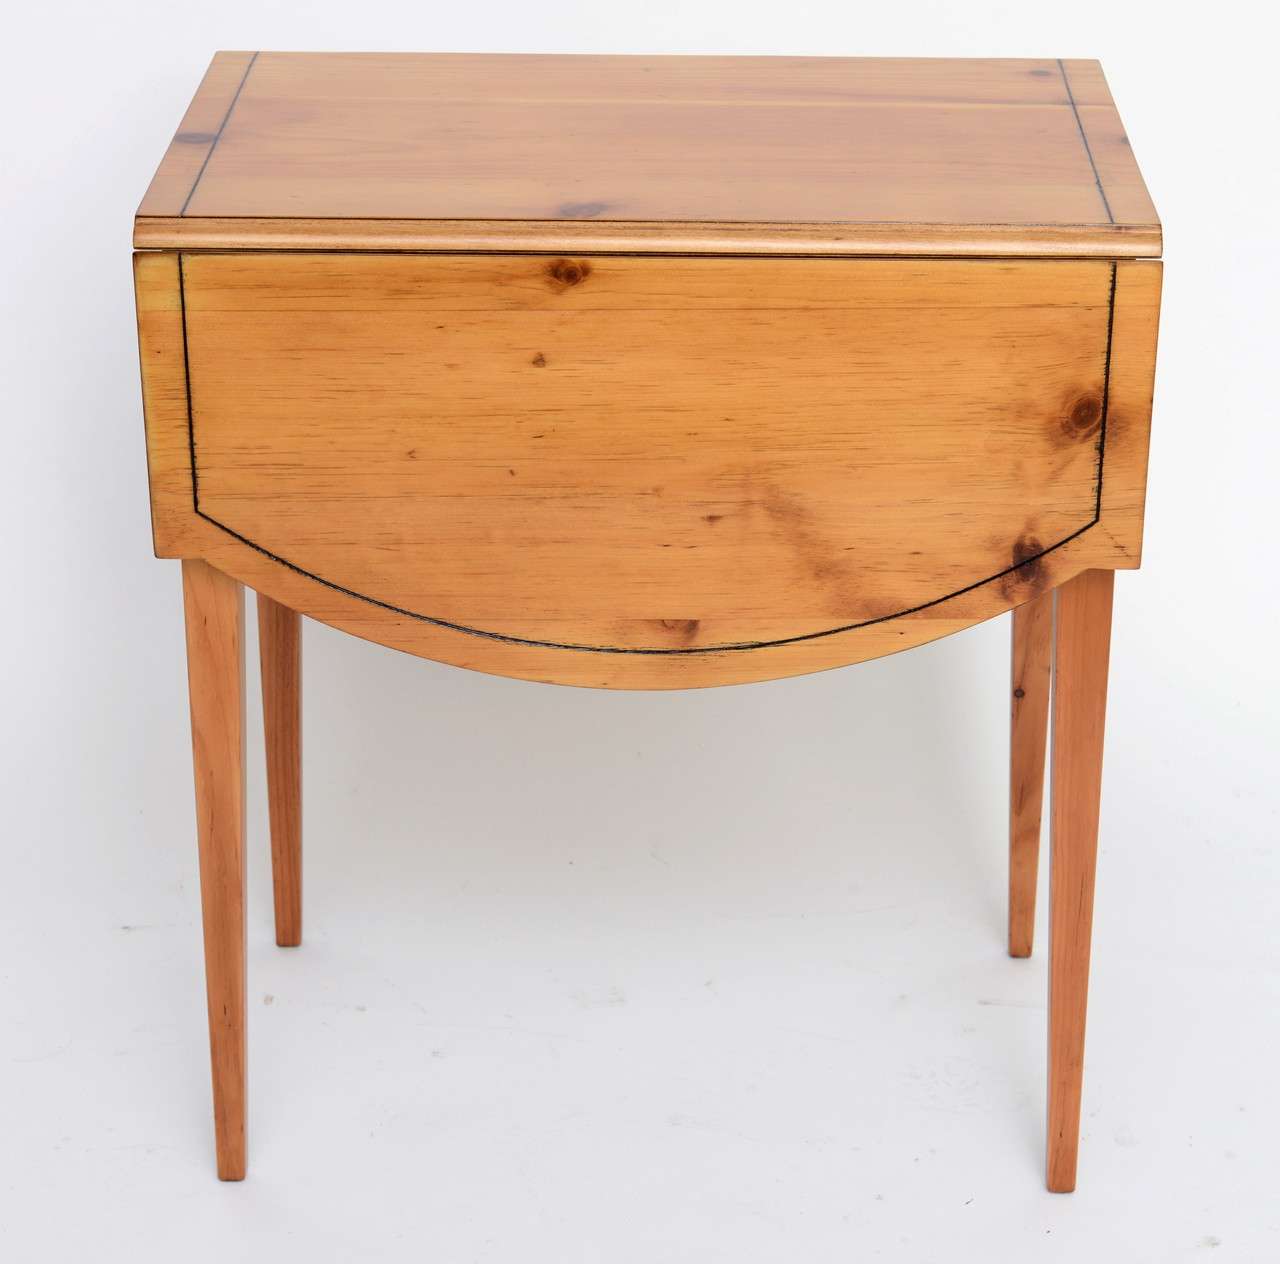 Charming 1940s Maryland Pine Pembroke Table 1